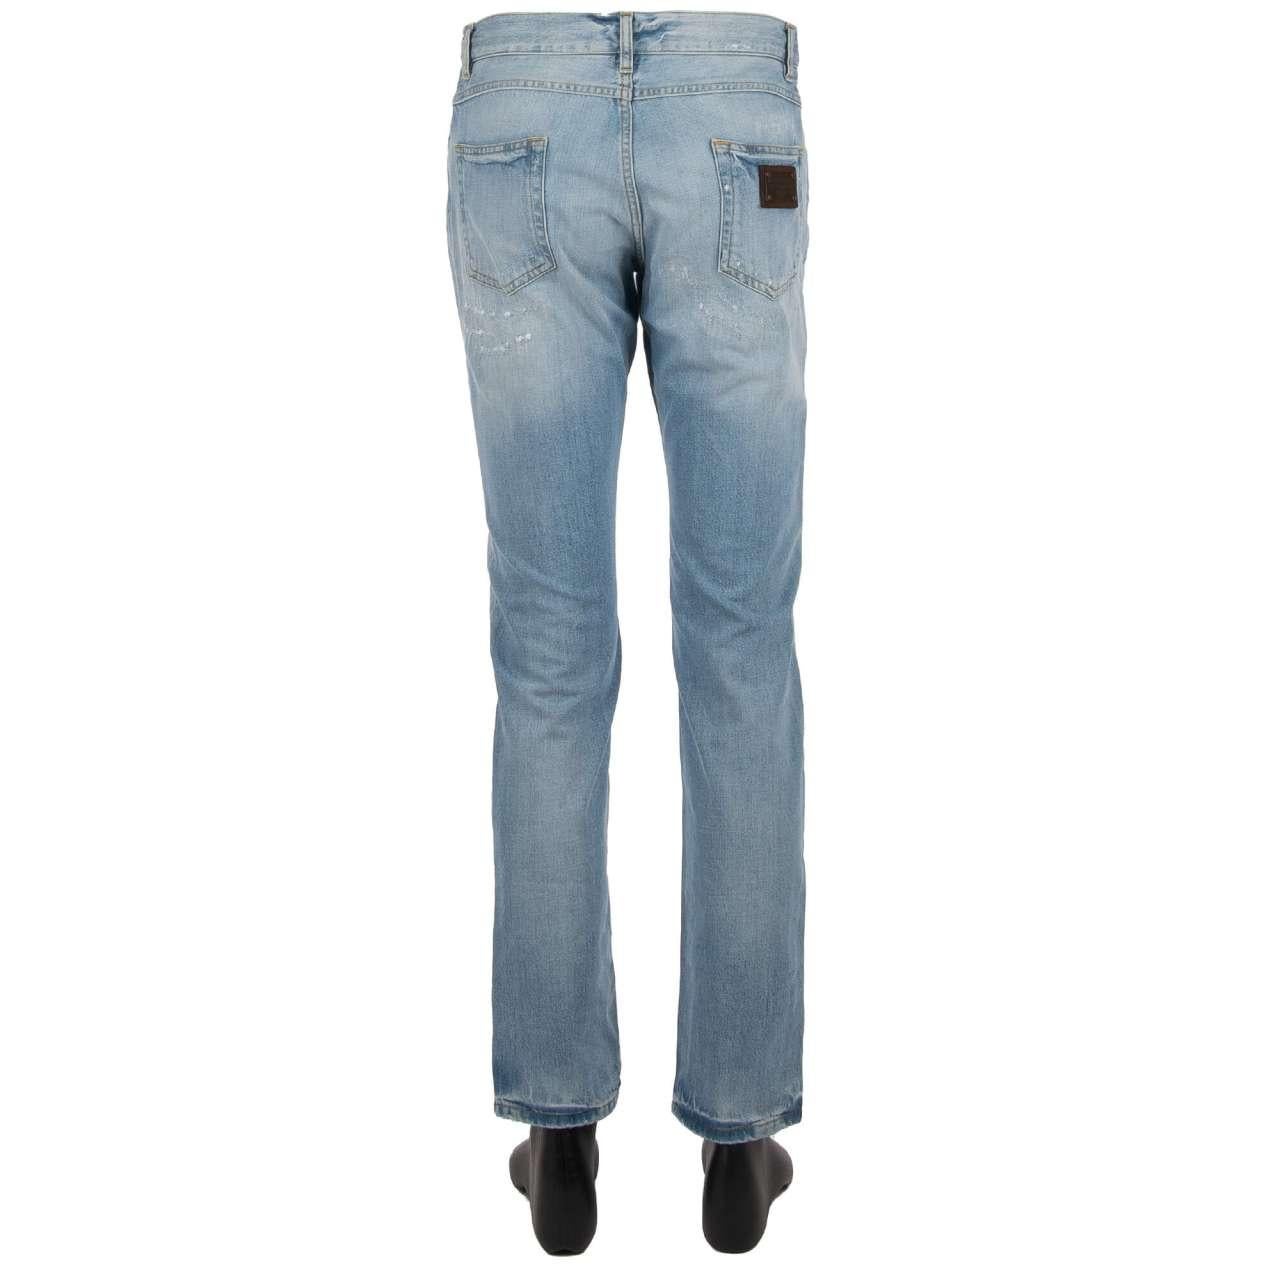 - Distressed straight cut 5-pockets Jeans with a large logo plate and logo sticker by DOLCE & GABBANA - New with tag - MADE IN ITALY - Former RRP: EUR 445 - Straight Cut - Model: GYJCCD-G8000-S9001 - Material: 100% Cotton - Color: Light Blue - 5